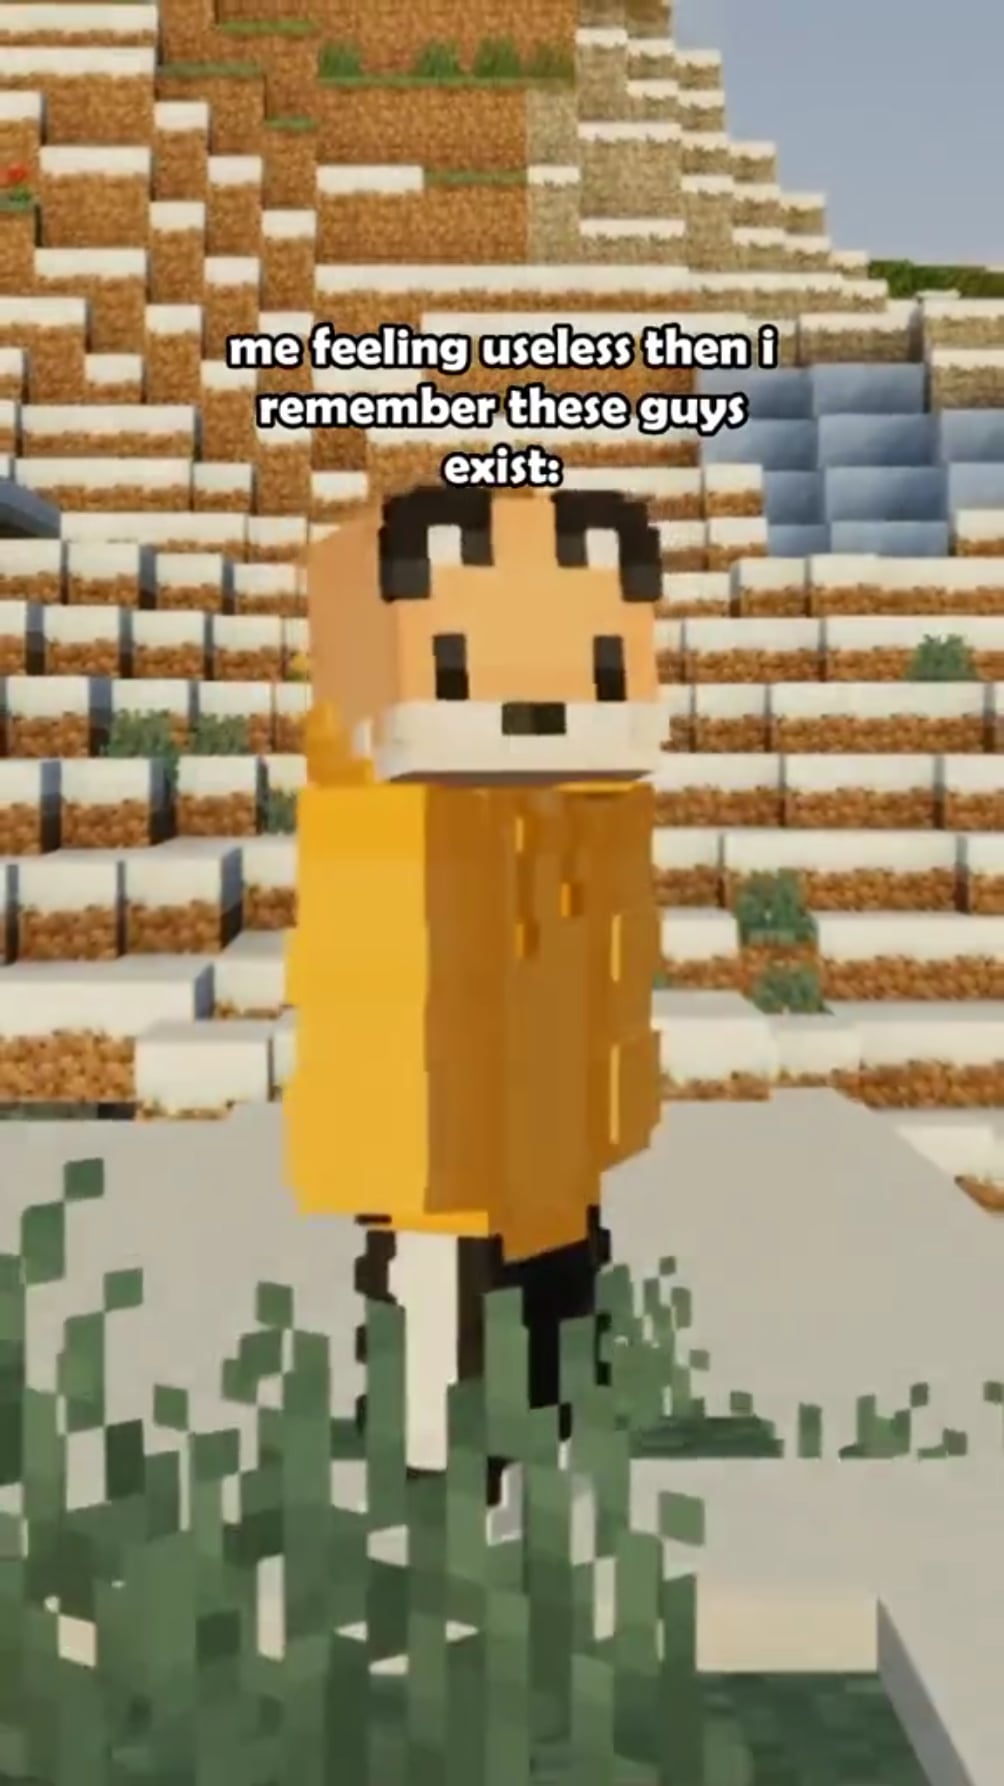 Minecraft Memes - Useless? Remember this Minecraft dude